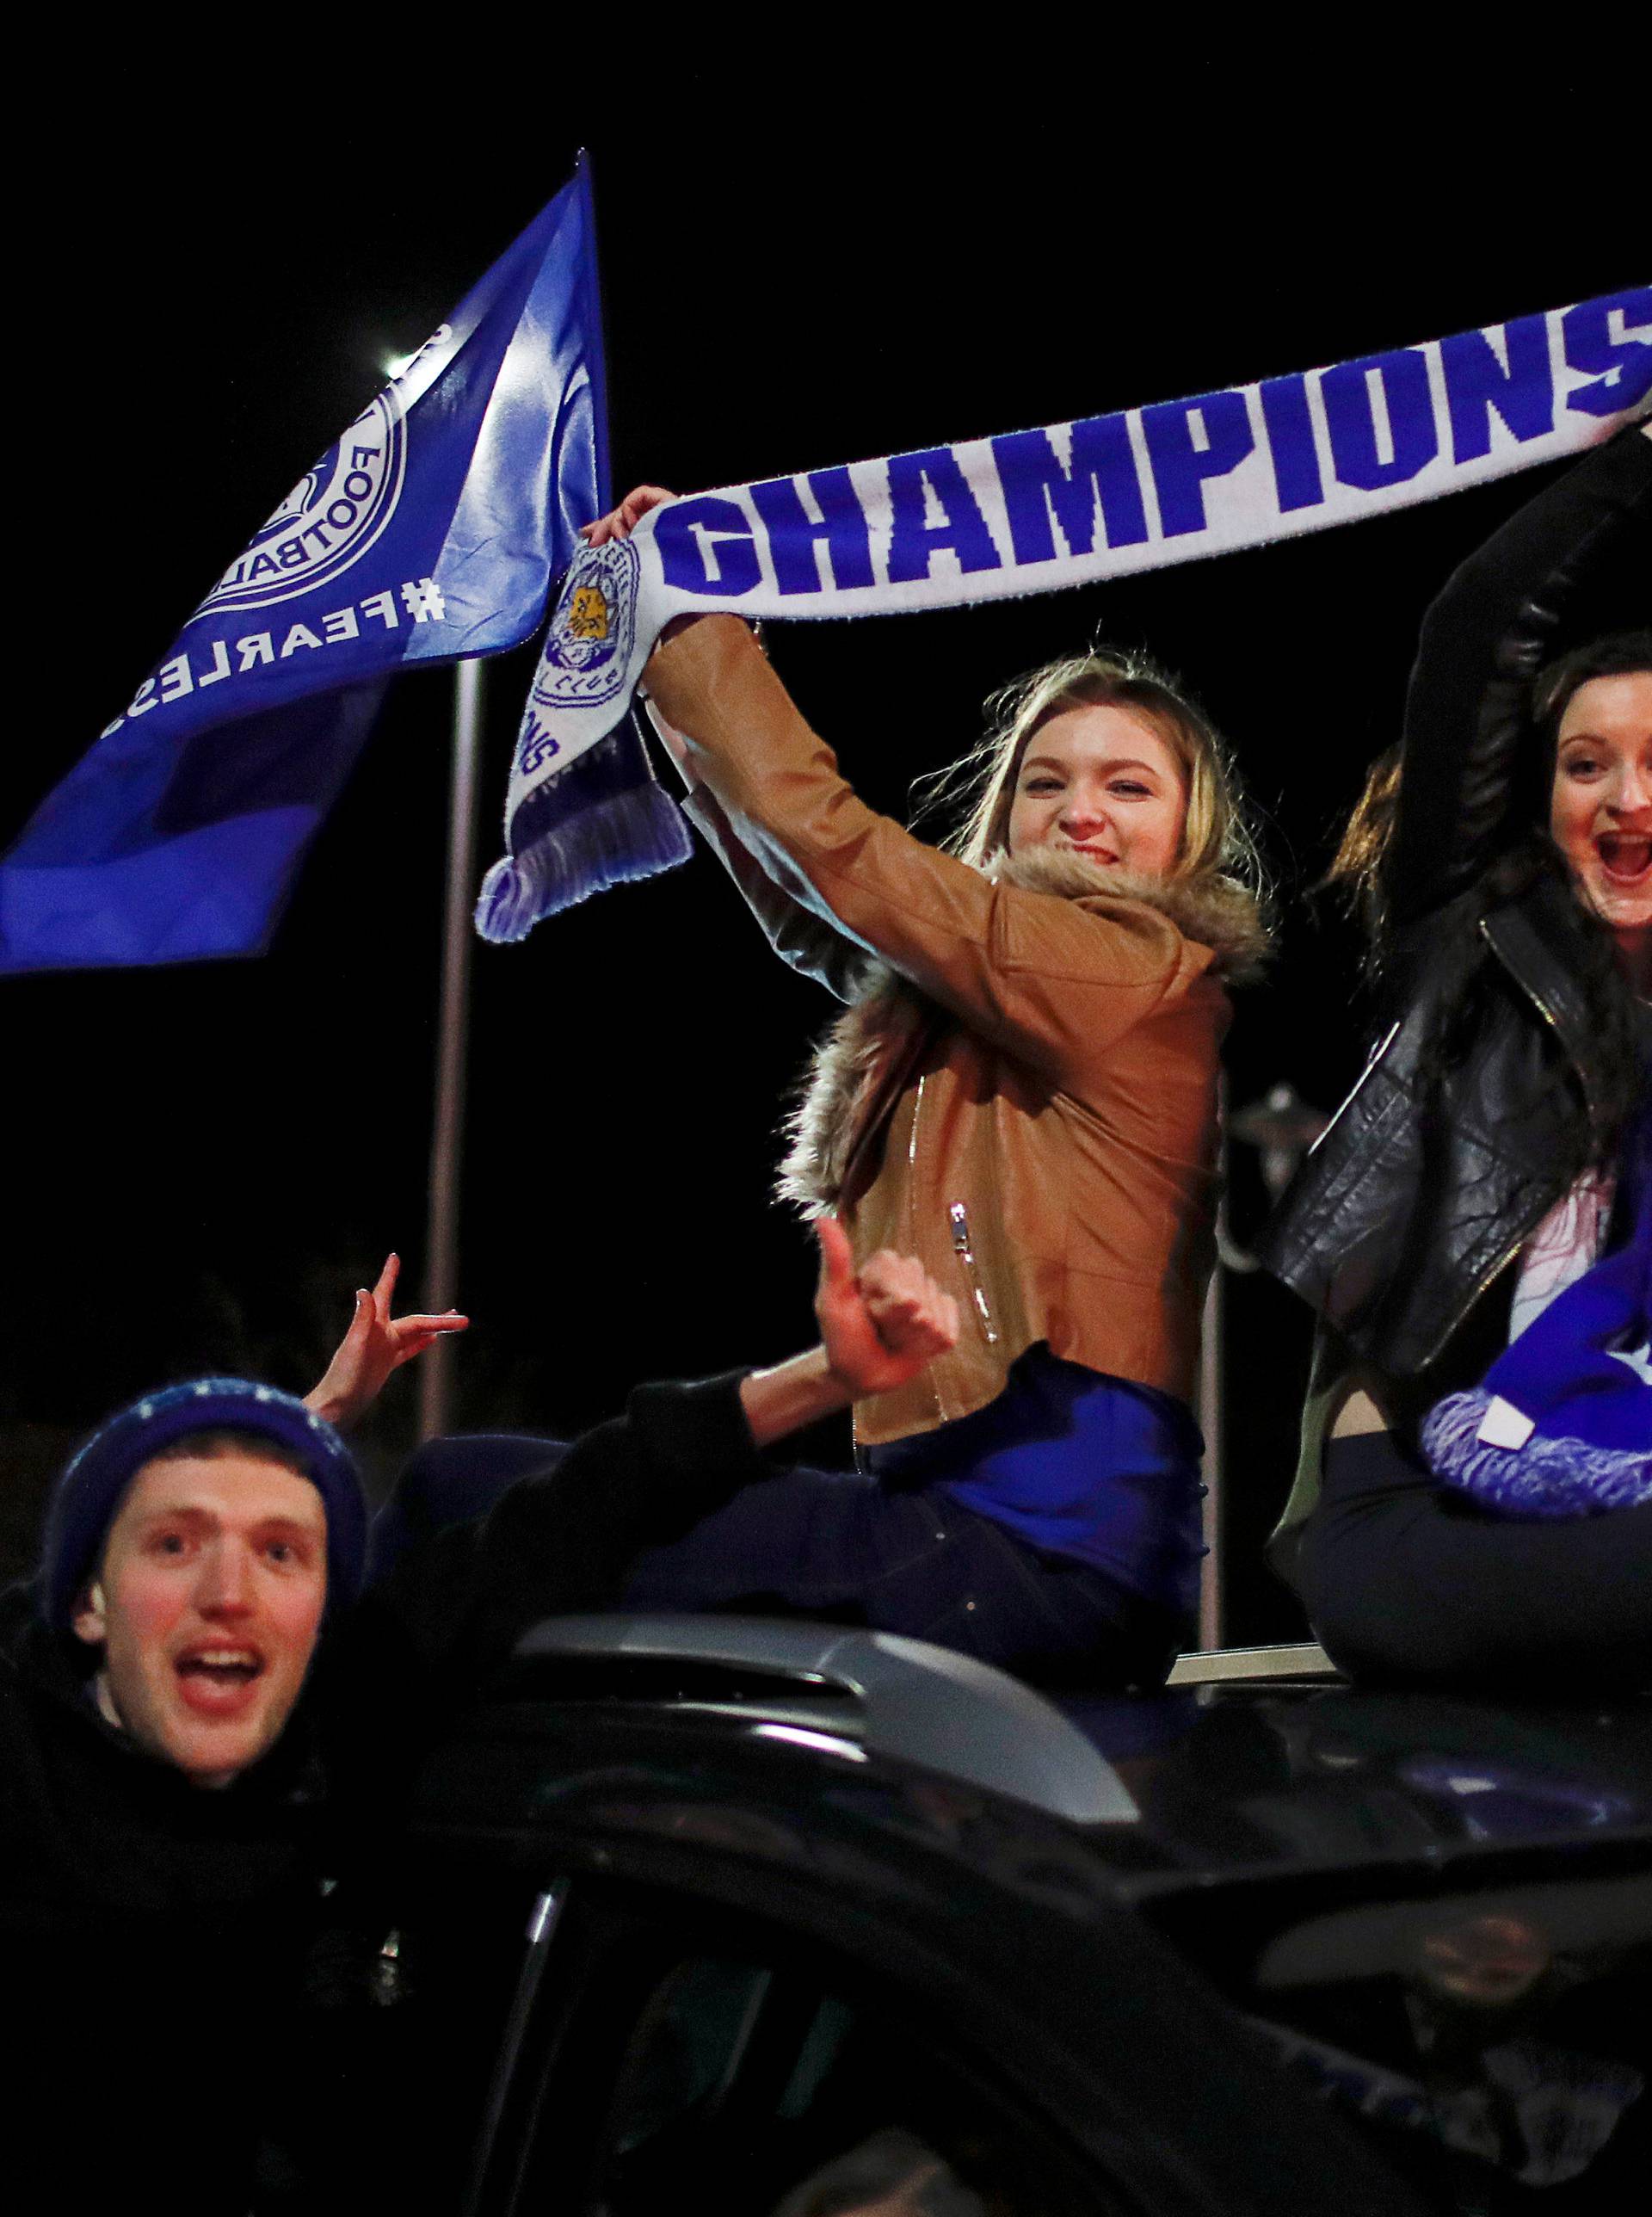 Leicester City fans celebrate outside the King Power stadium after their team won the Premier League title in Leicester